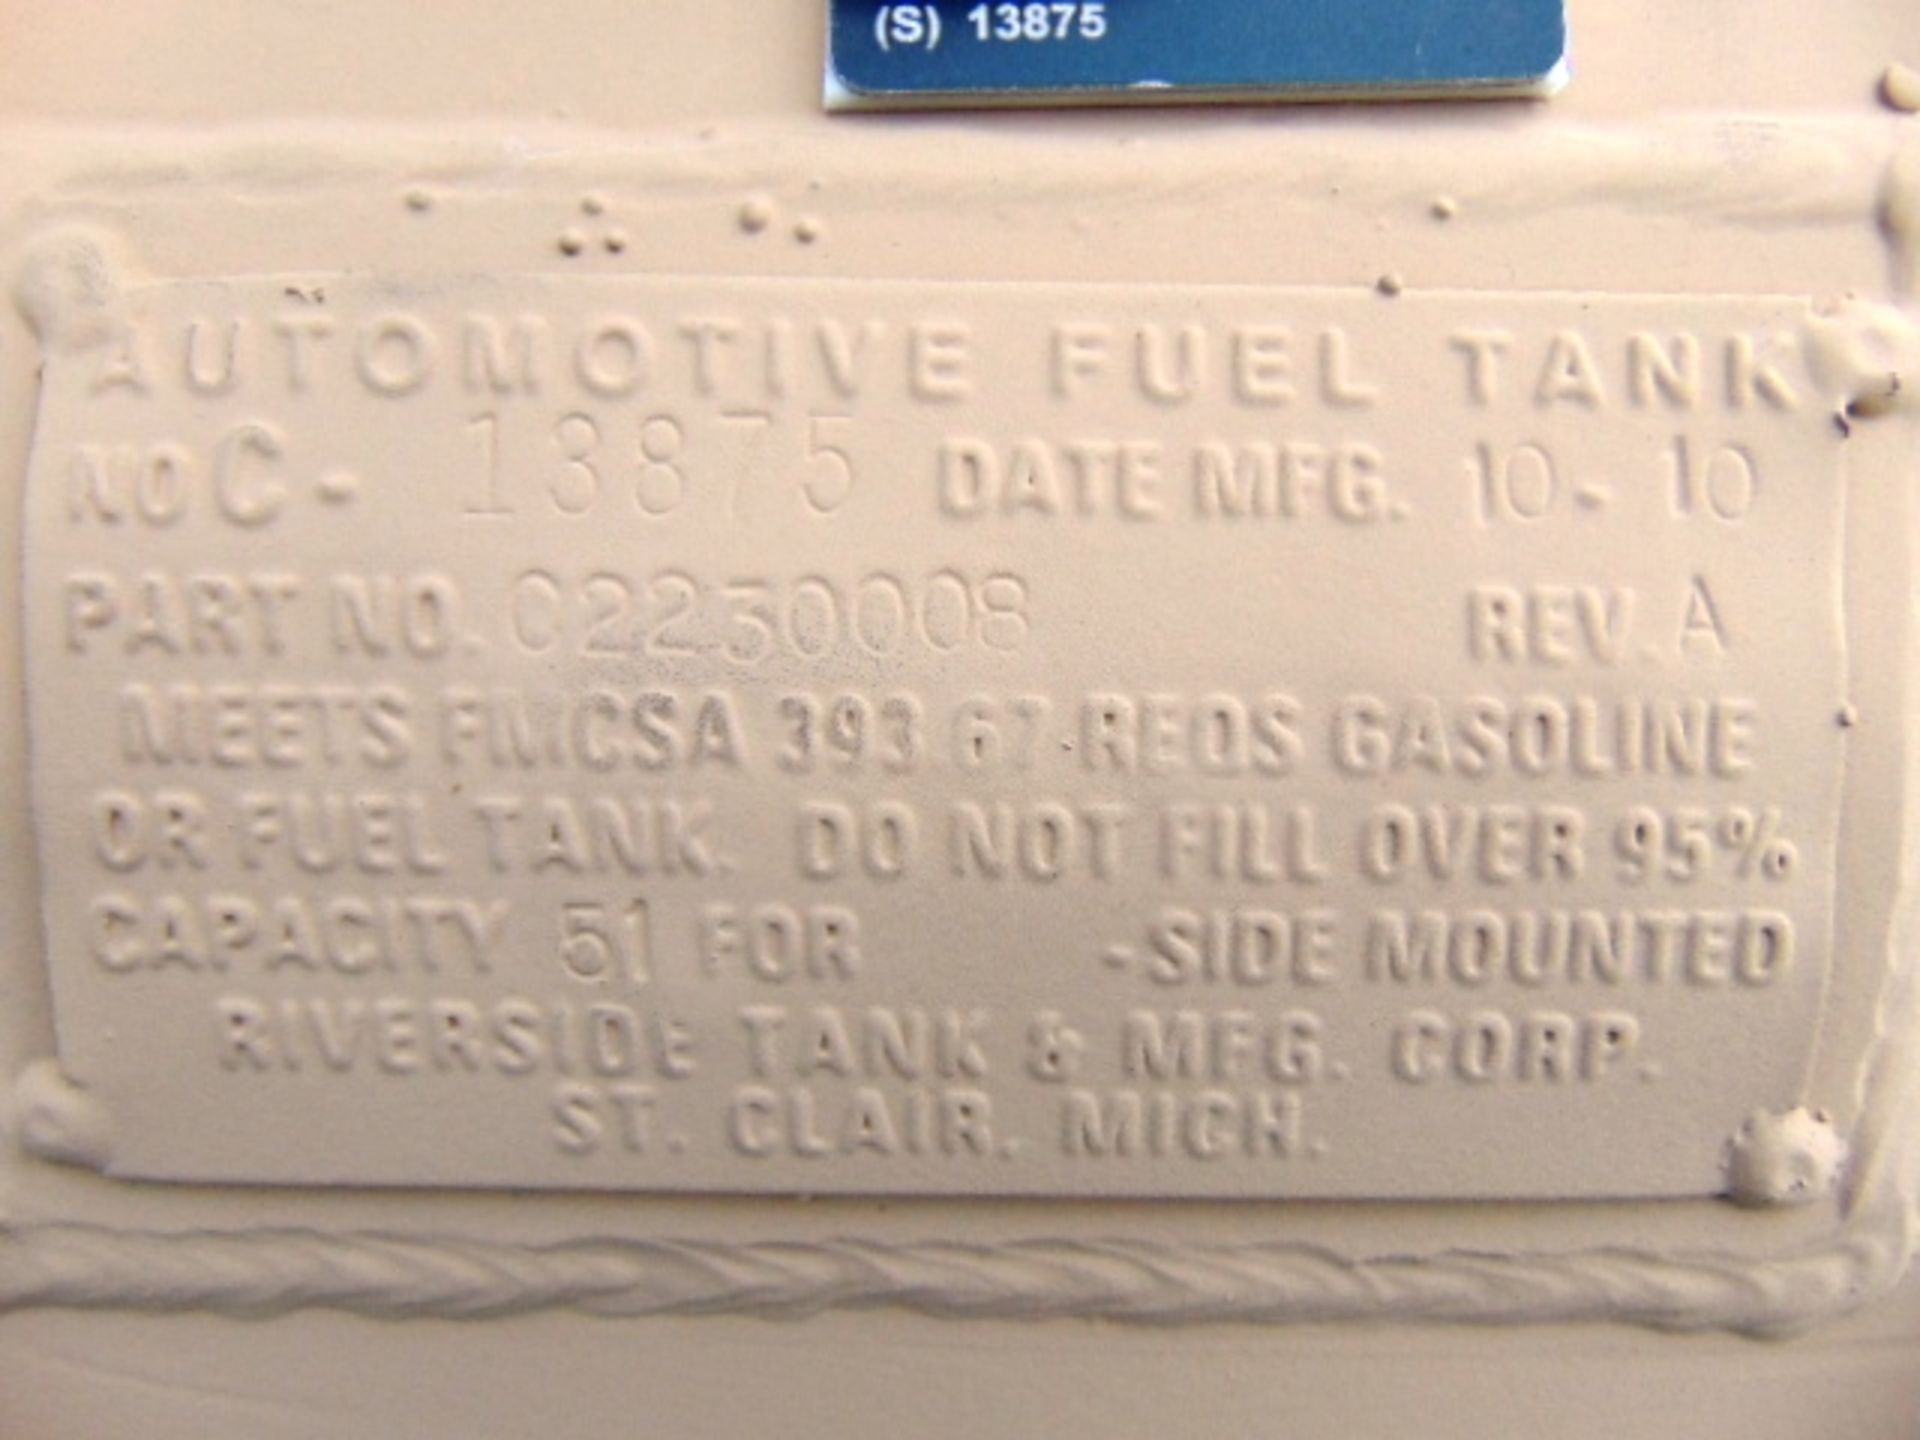 6 x Unissued Heavy Duty 51 US gall Automotive Fuel Tanks - Image 5 of 6